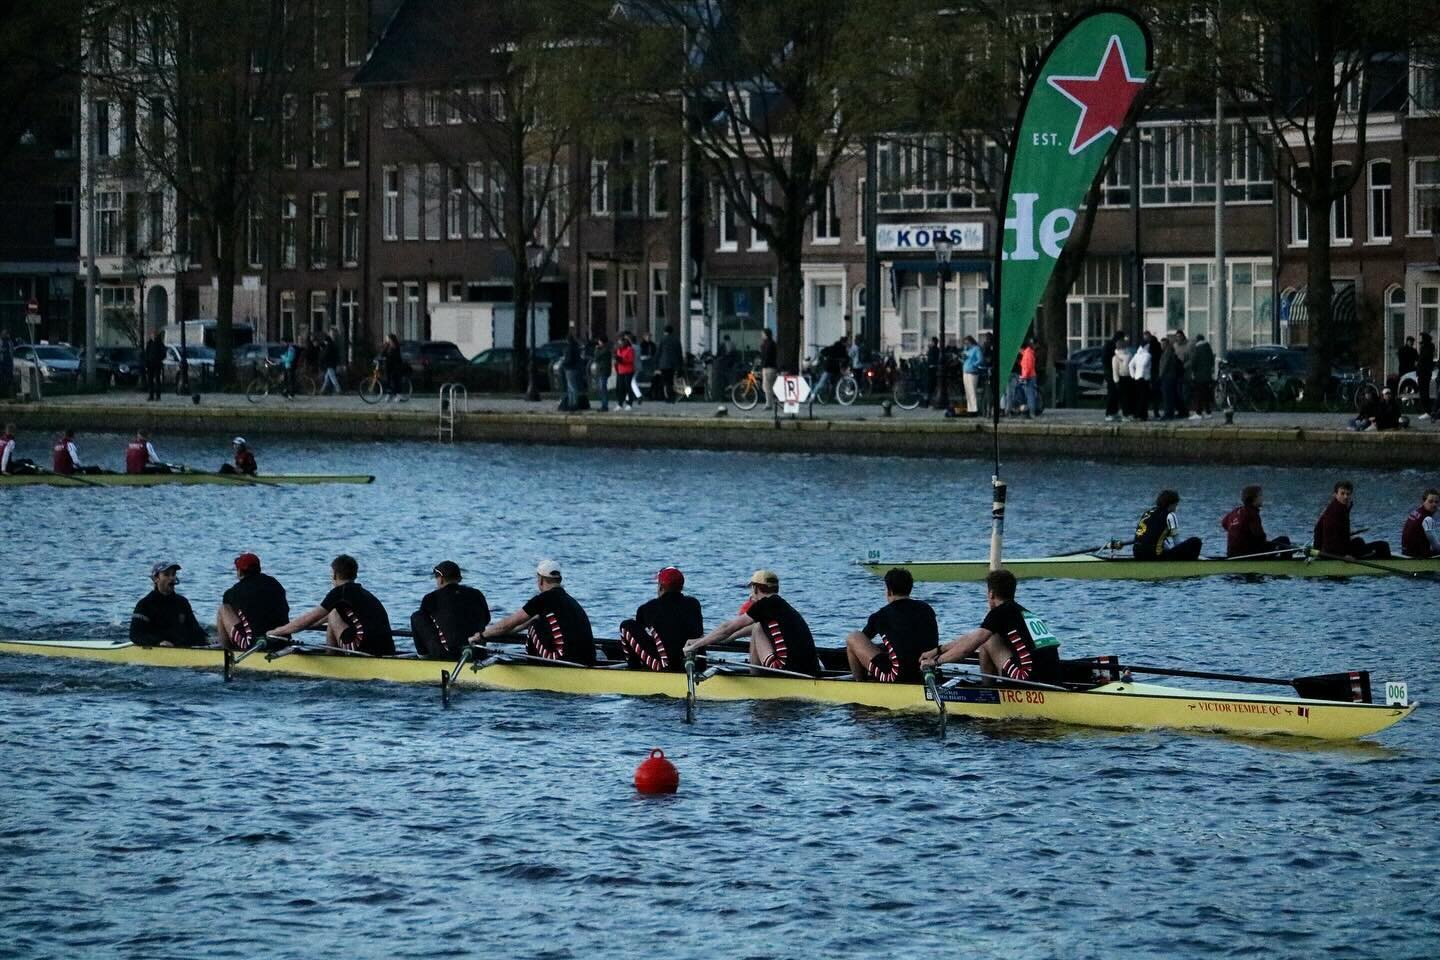 🇳🇱 TRC in Amsterdam 🇳🇱 

Thames took four women&rsquo;s eights, one men&rsquo;s eight and a master&rsquo;s men&rsquo;s eight to the Heineken Roeivierkamp in Amsterdam this weekend to race some of the fastest crews on the continent over two days a